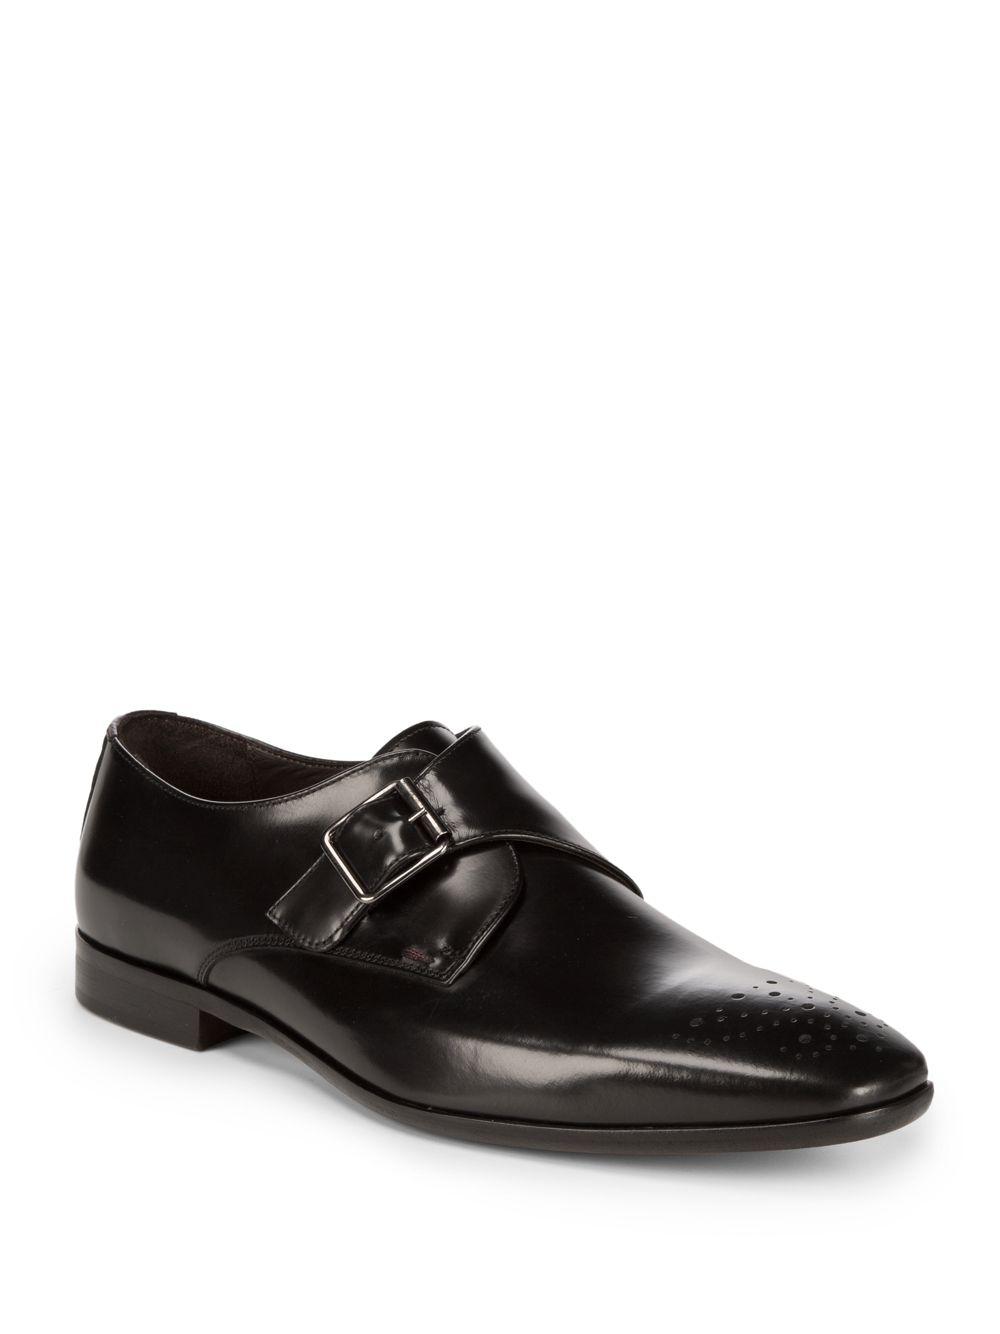 Bruno Magli Leather Brogue Monk-strap Dress Shoes in Black for Men - Lyst